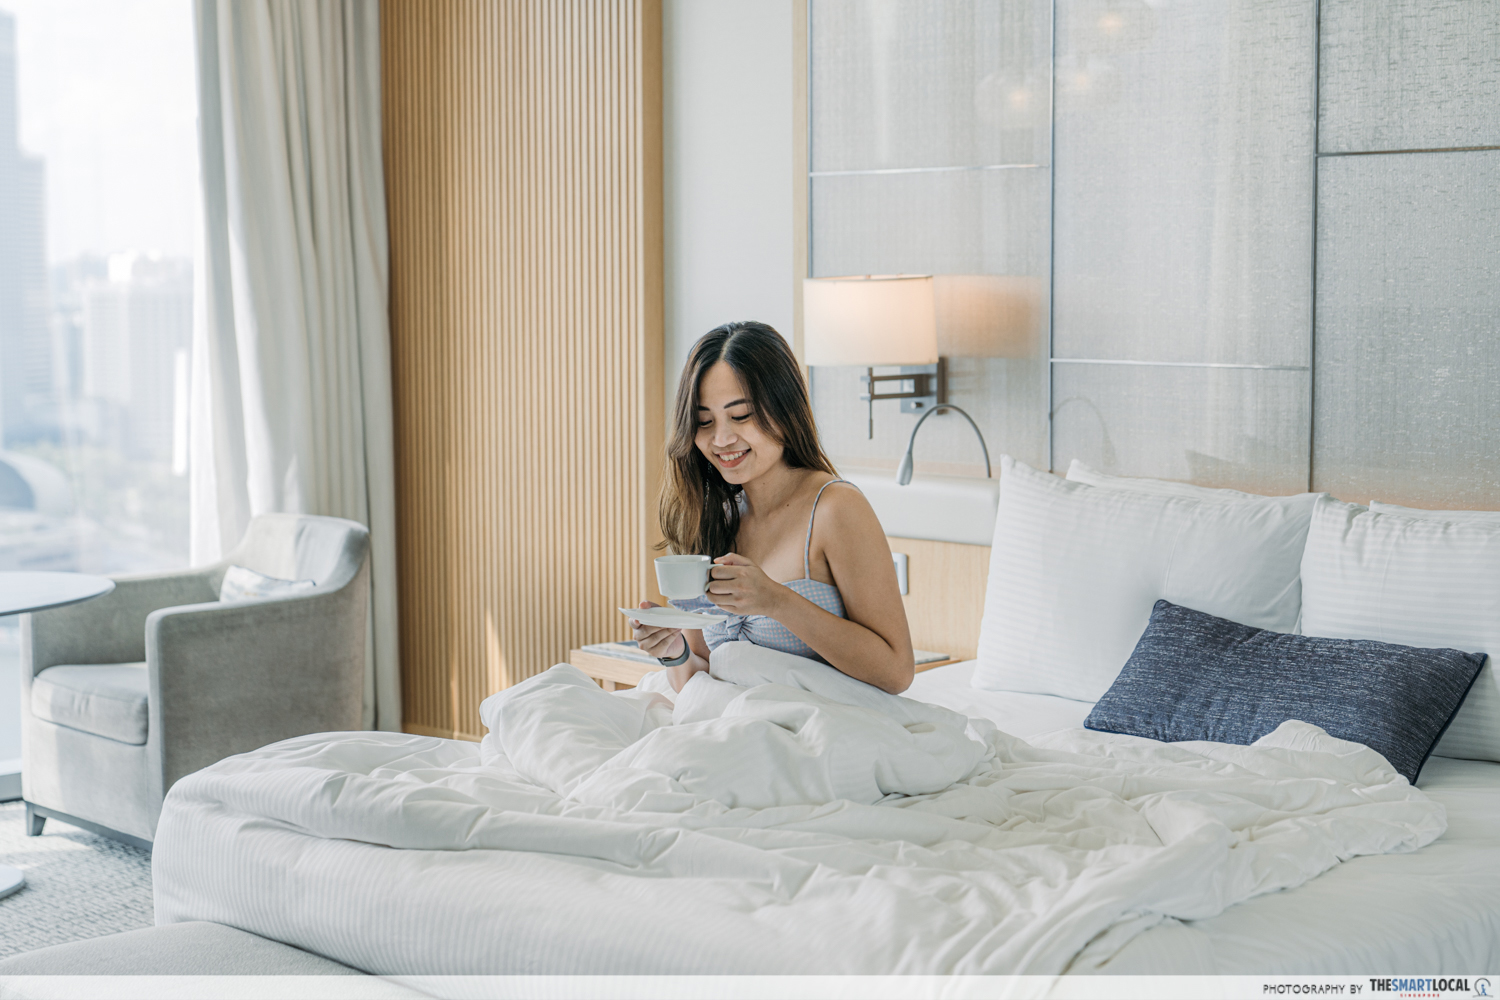 Girl having a staycation in bed at MBS hotel